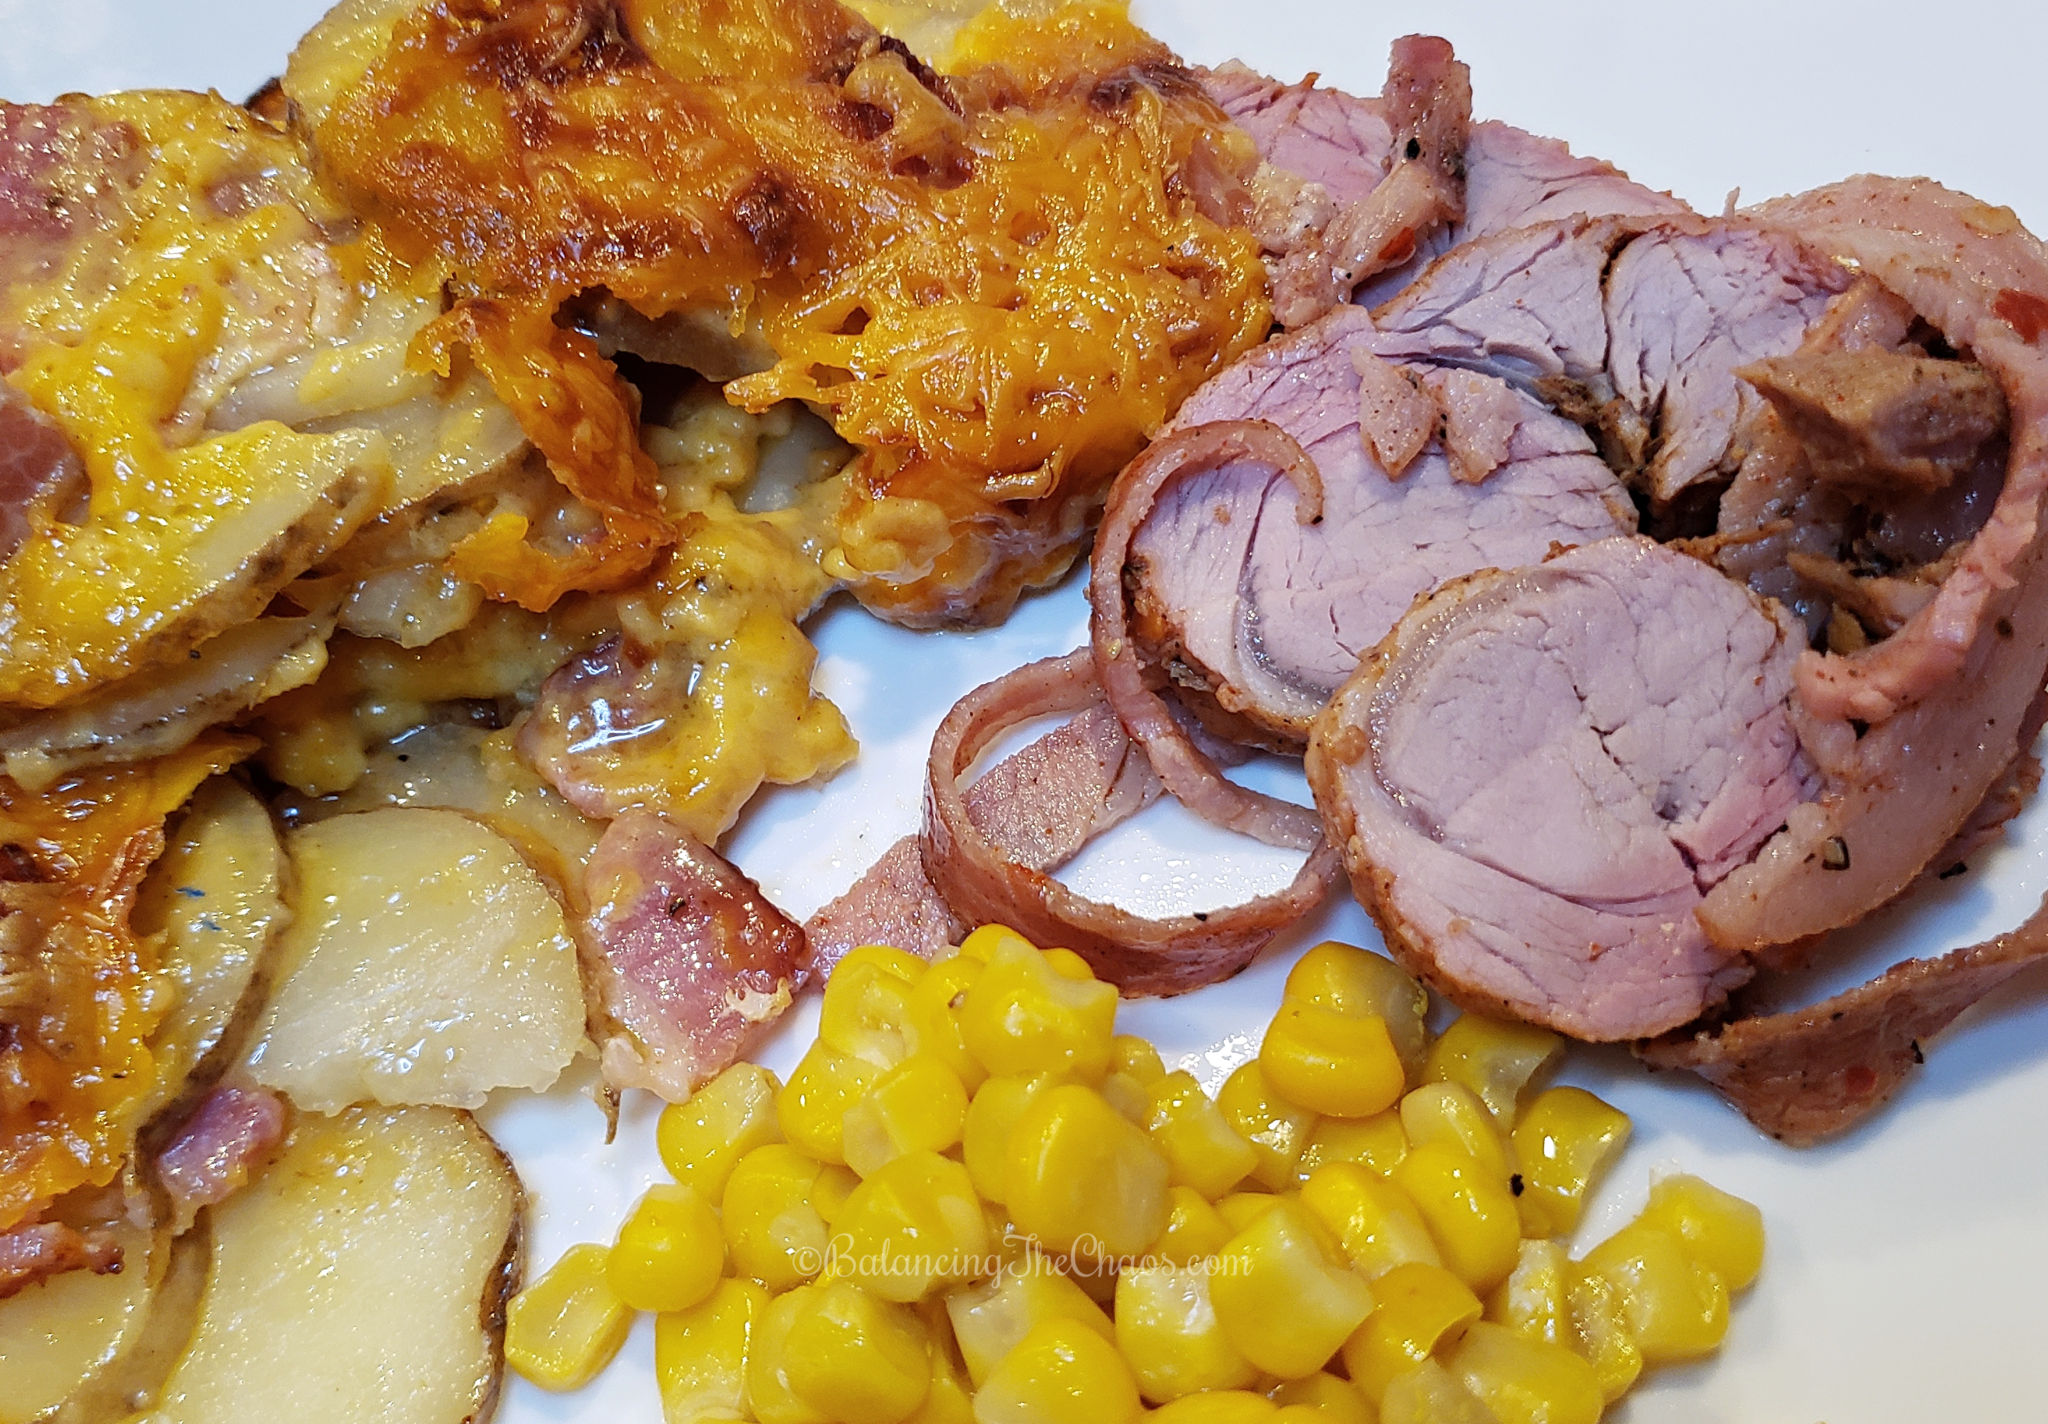 Smart & Final Family Meals Month
Scalloped Potatoes with Bacon, Pork Tenderloin and Corn